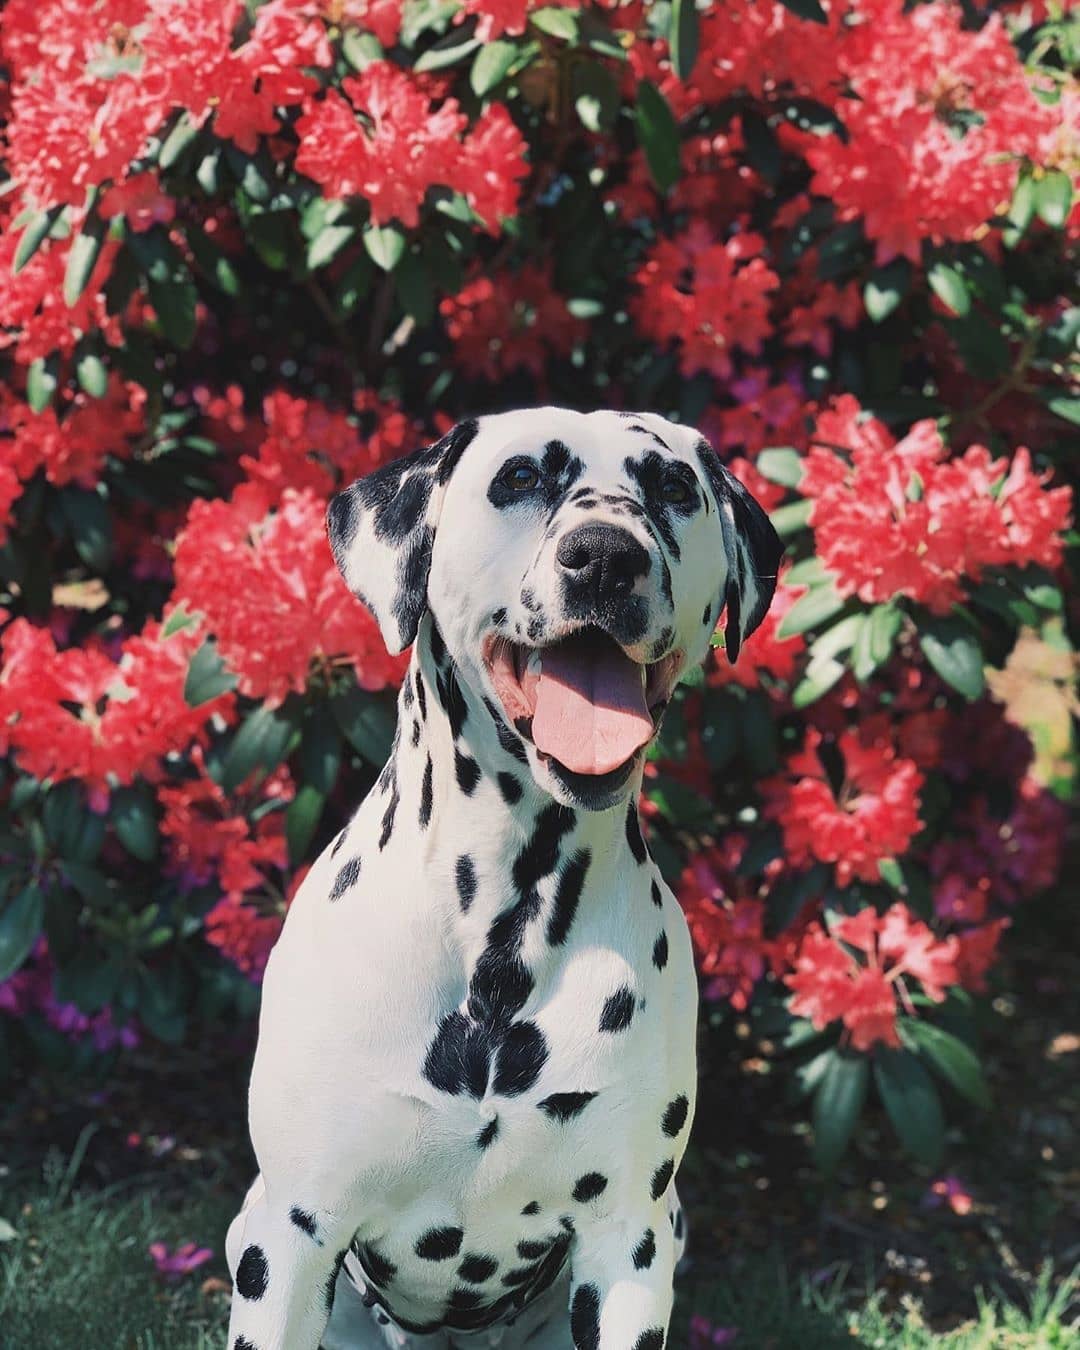 A Dalmatian sitting in the garden with bright pink flowers behind him